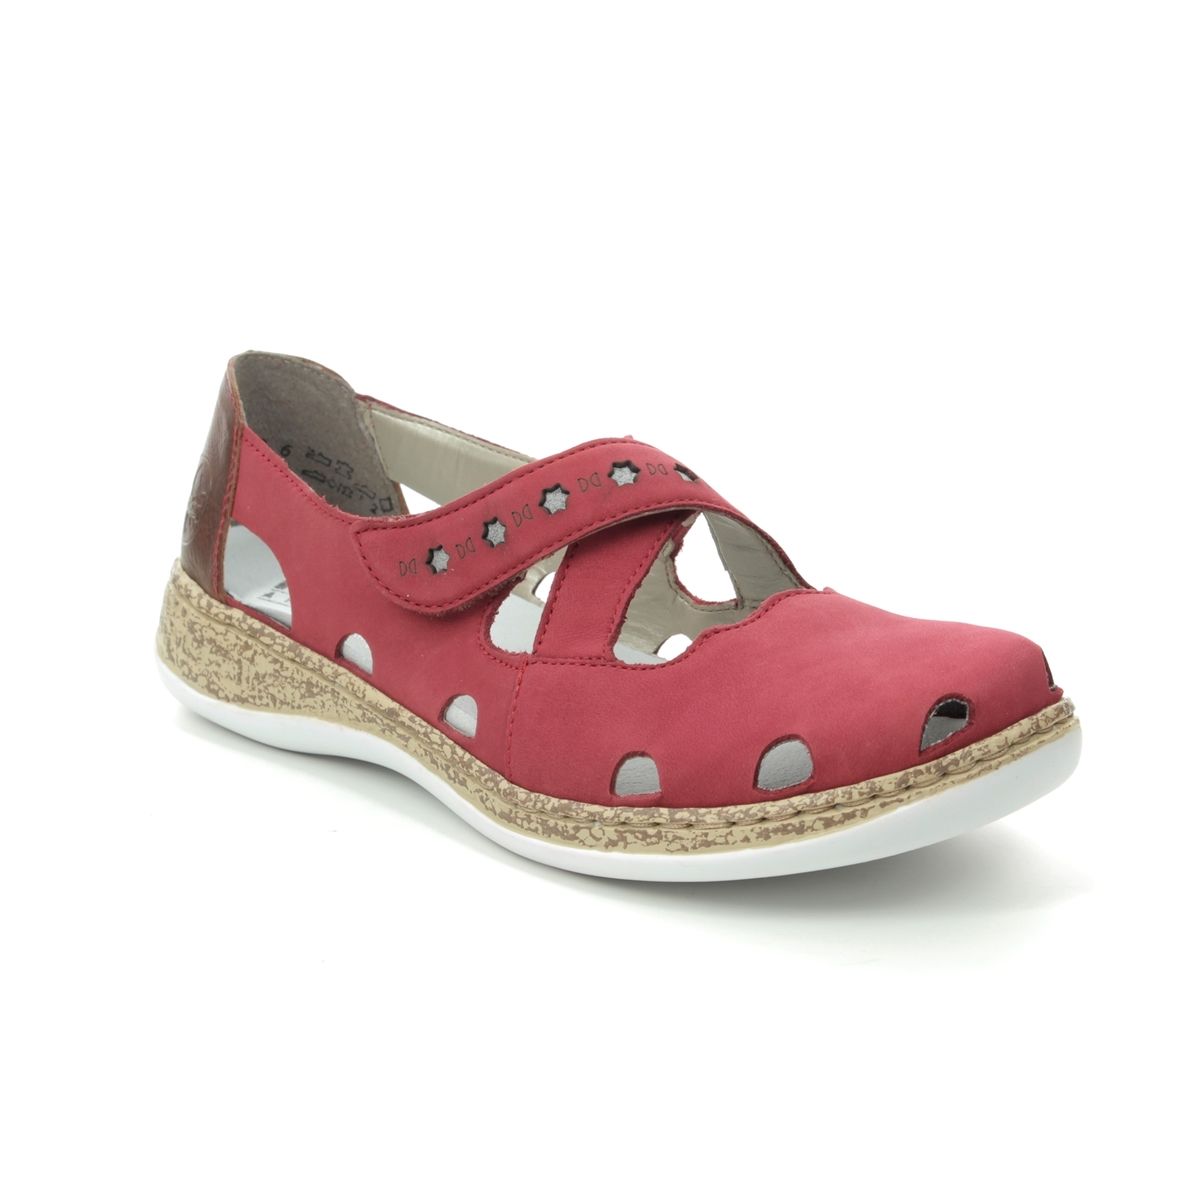 Rieker 46356-33 RED TAN Mary Jane Shoes